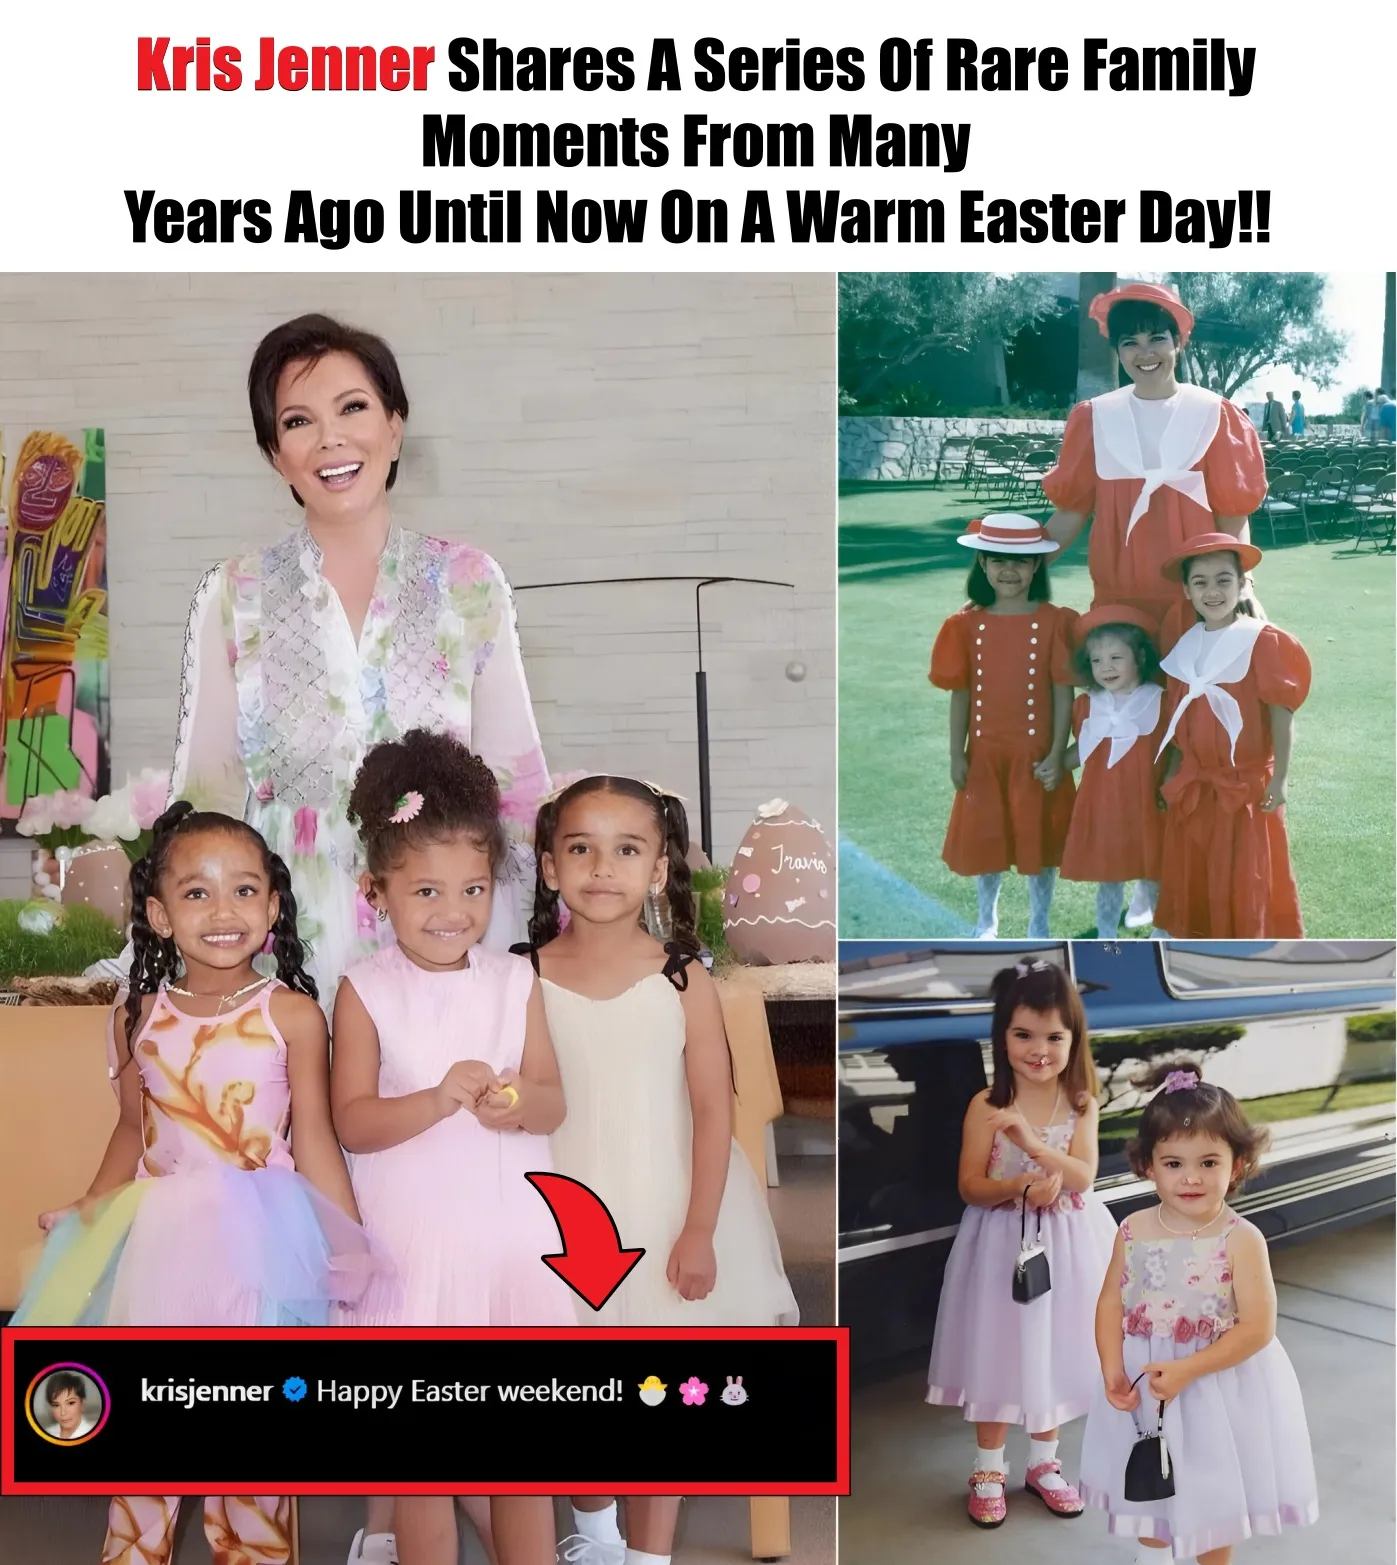 Cover Image for Kris Jenner Shares A Series Of Rare Family Moments From Many Years Ago Until Now On A Warm Easter Day